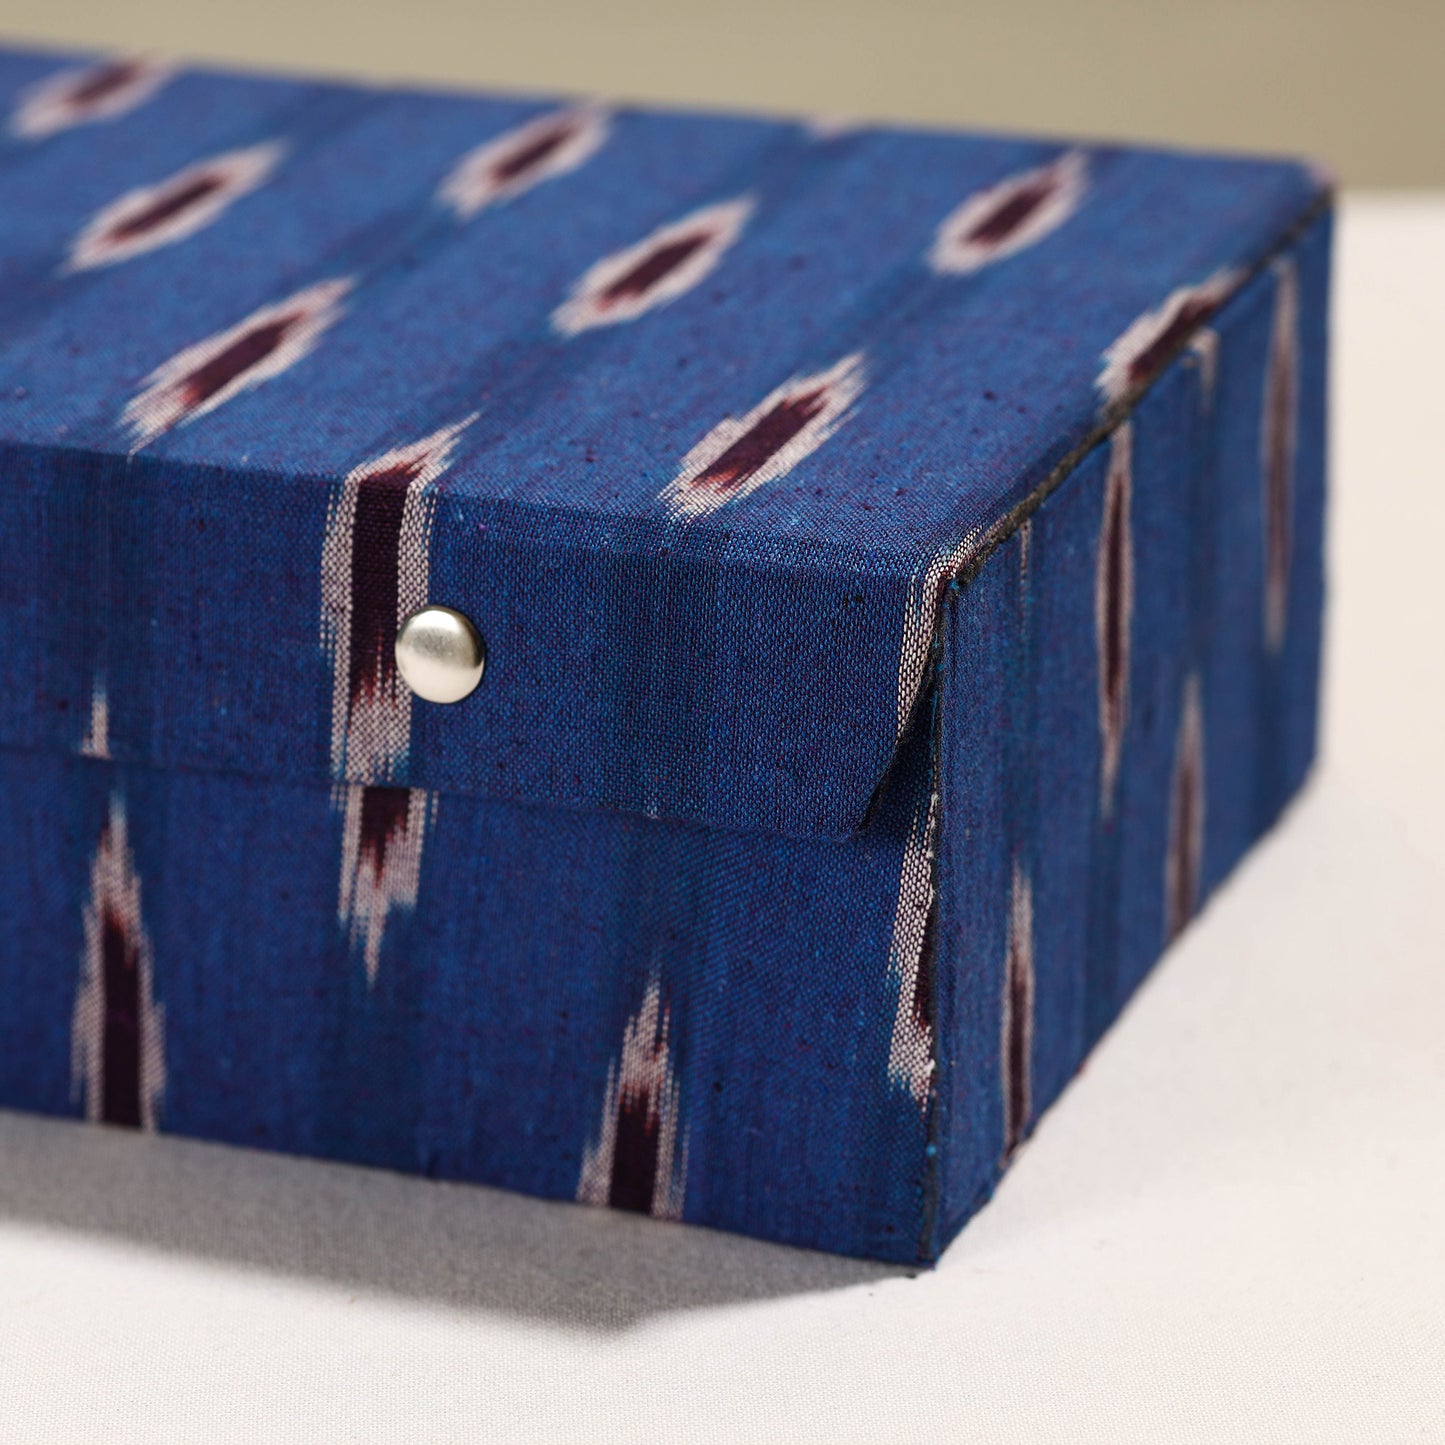 Handcrafted Ikat Fabric Embellished Two Rods Bangle Box (11 x 7 in)